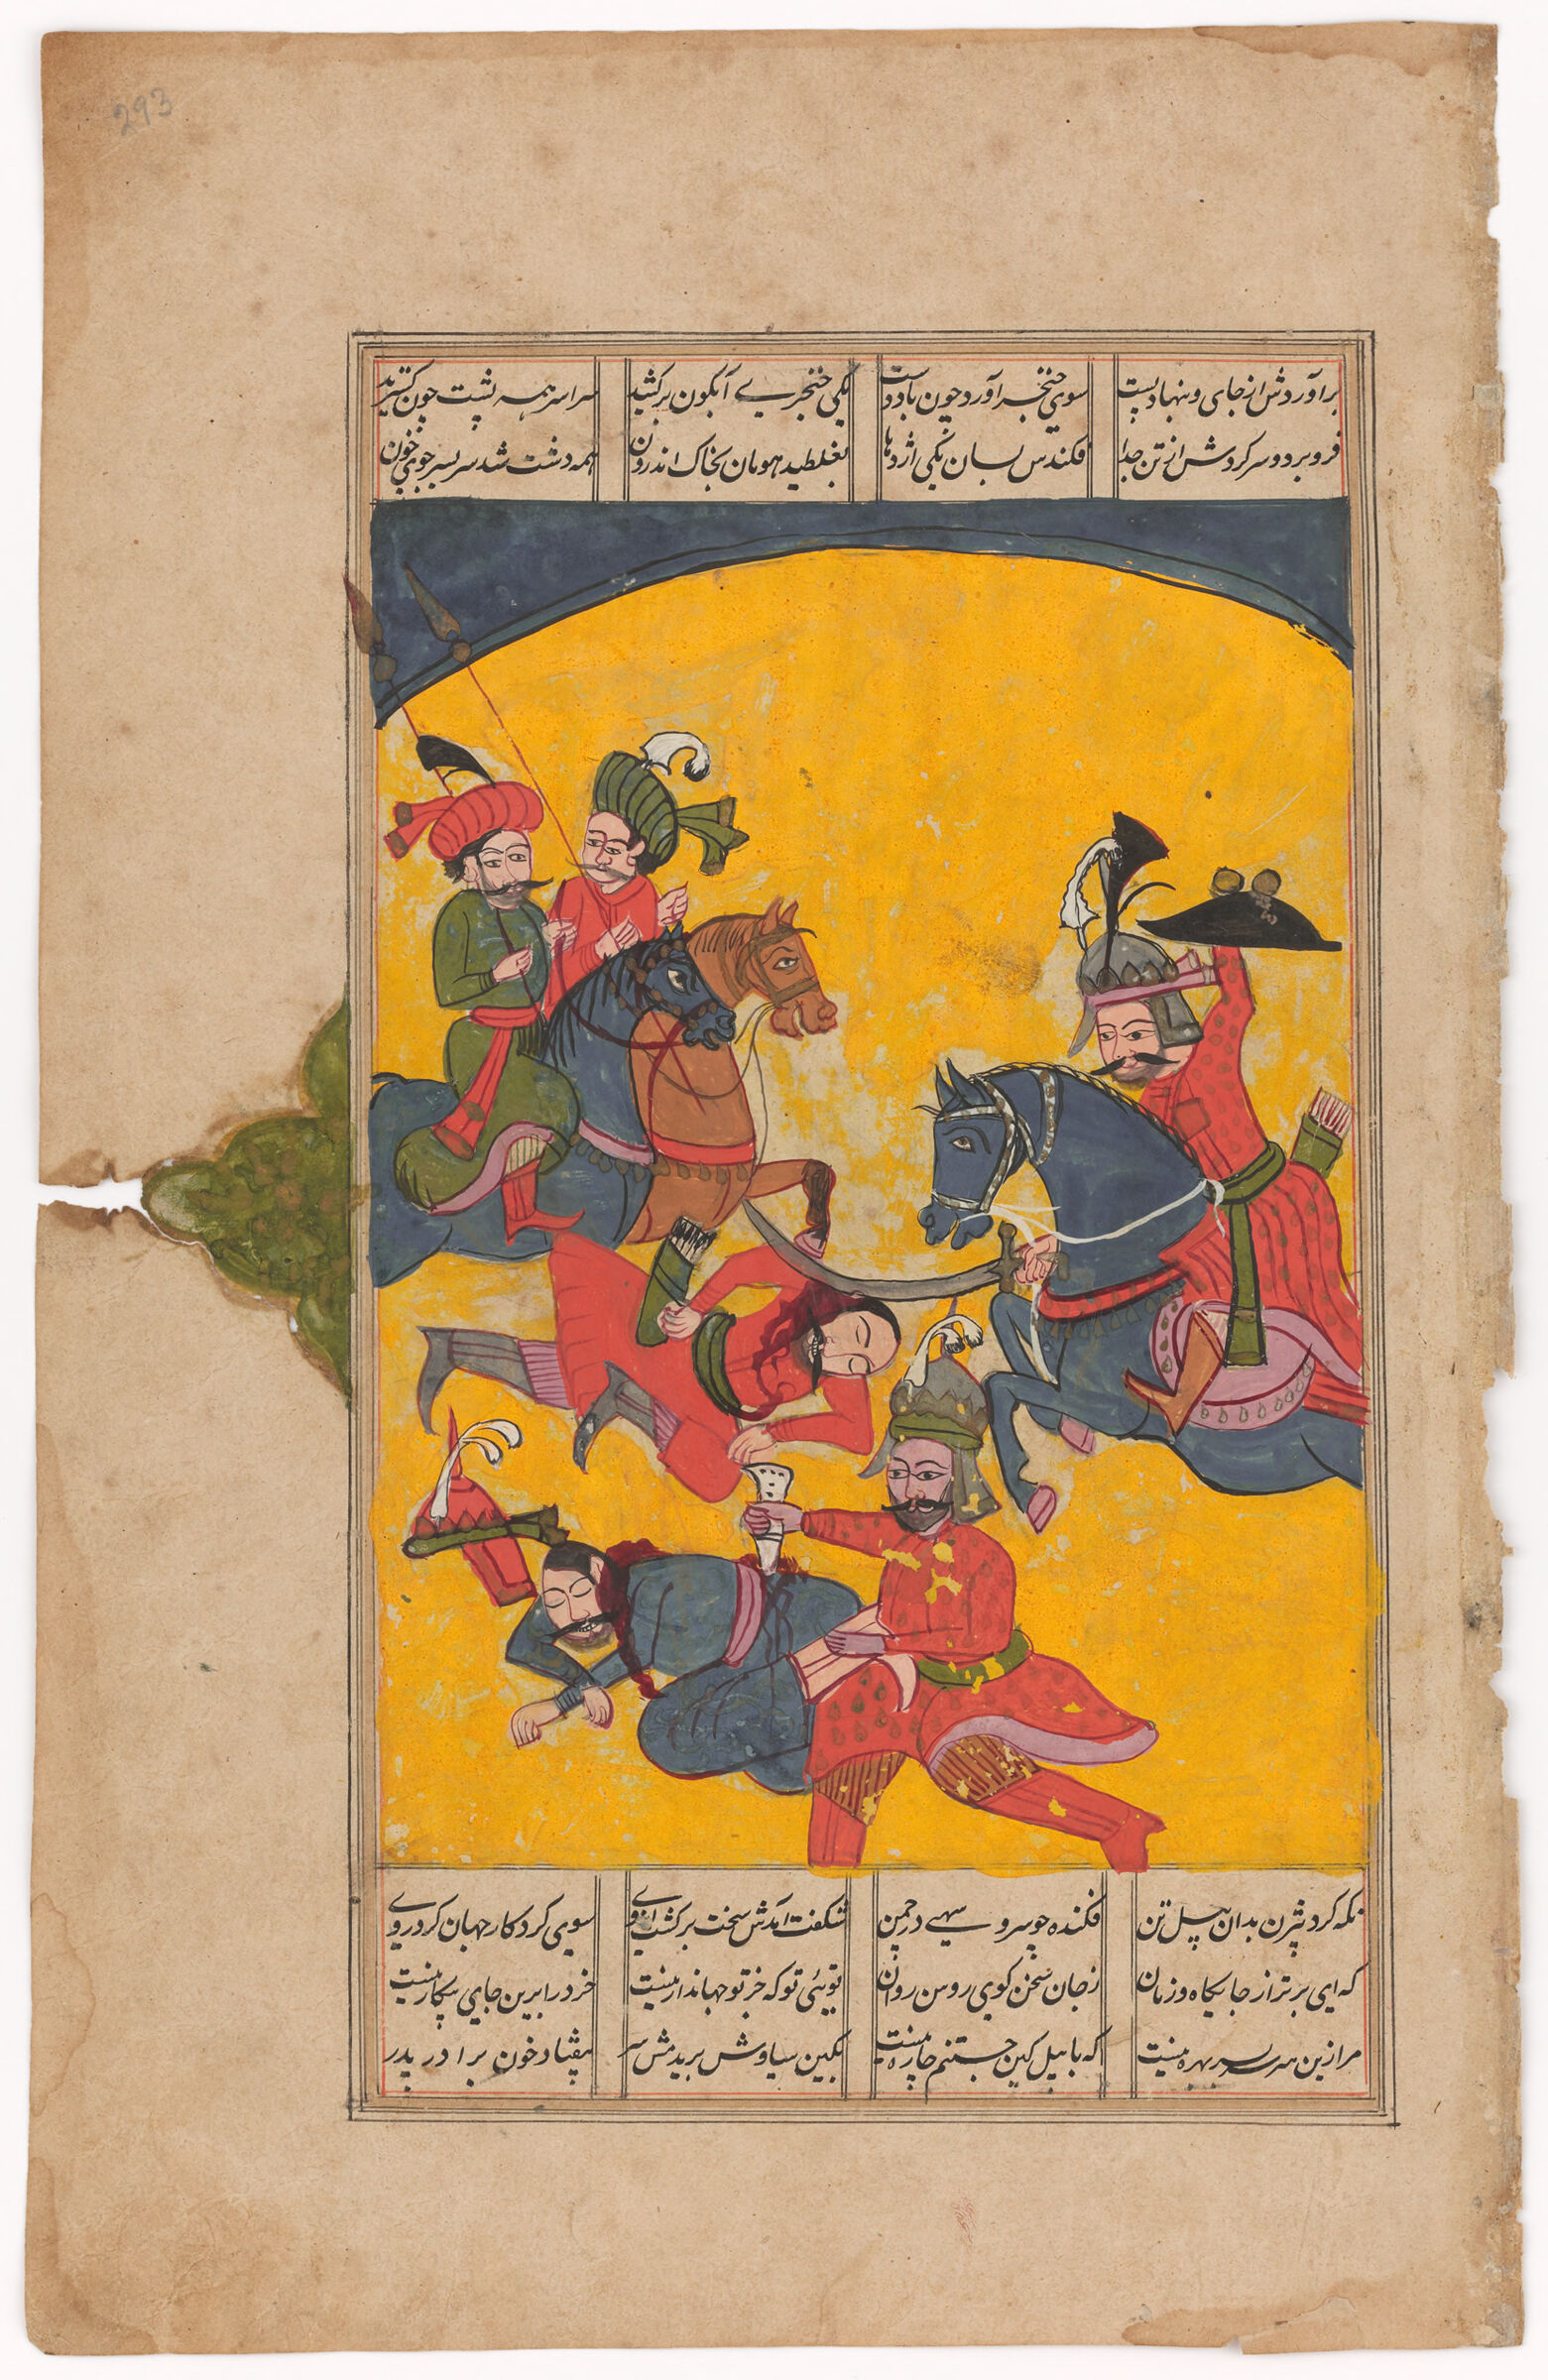 Human Is Killed By Bijan In Battle (Painting Recto; Text Verso Of Folio 293), Illustrated Folio From A Manuscript Of The Shahnama By Firdawsi